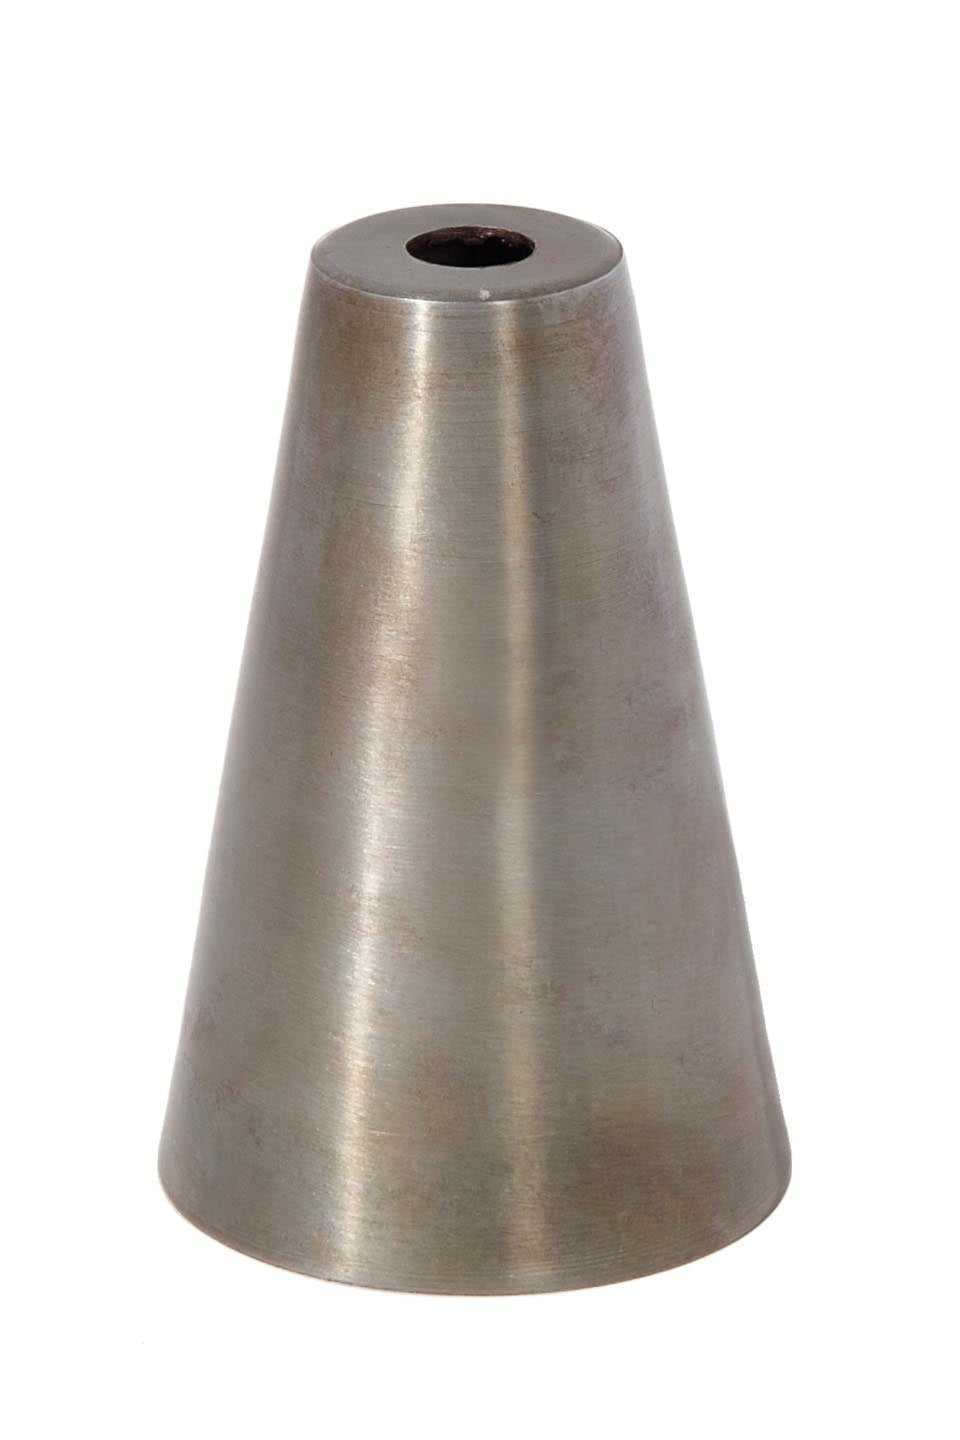 3.4 Inch Tall Unfinished Steel Cone Socket Cup, 1/8IP Slip